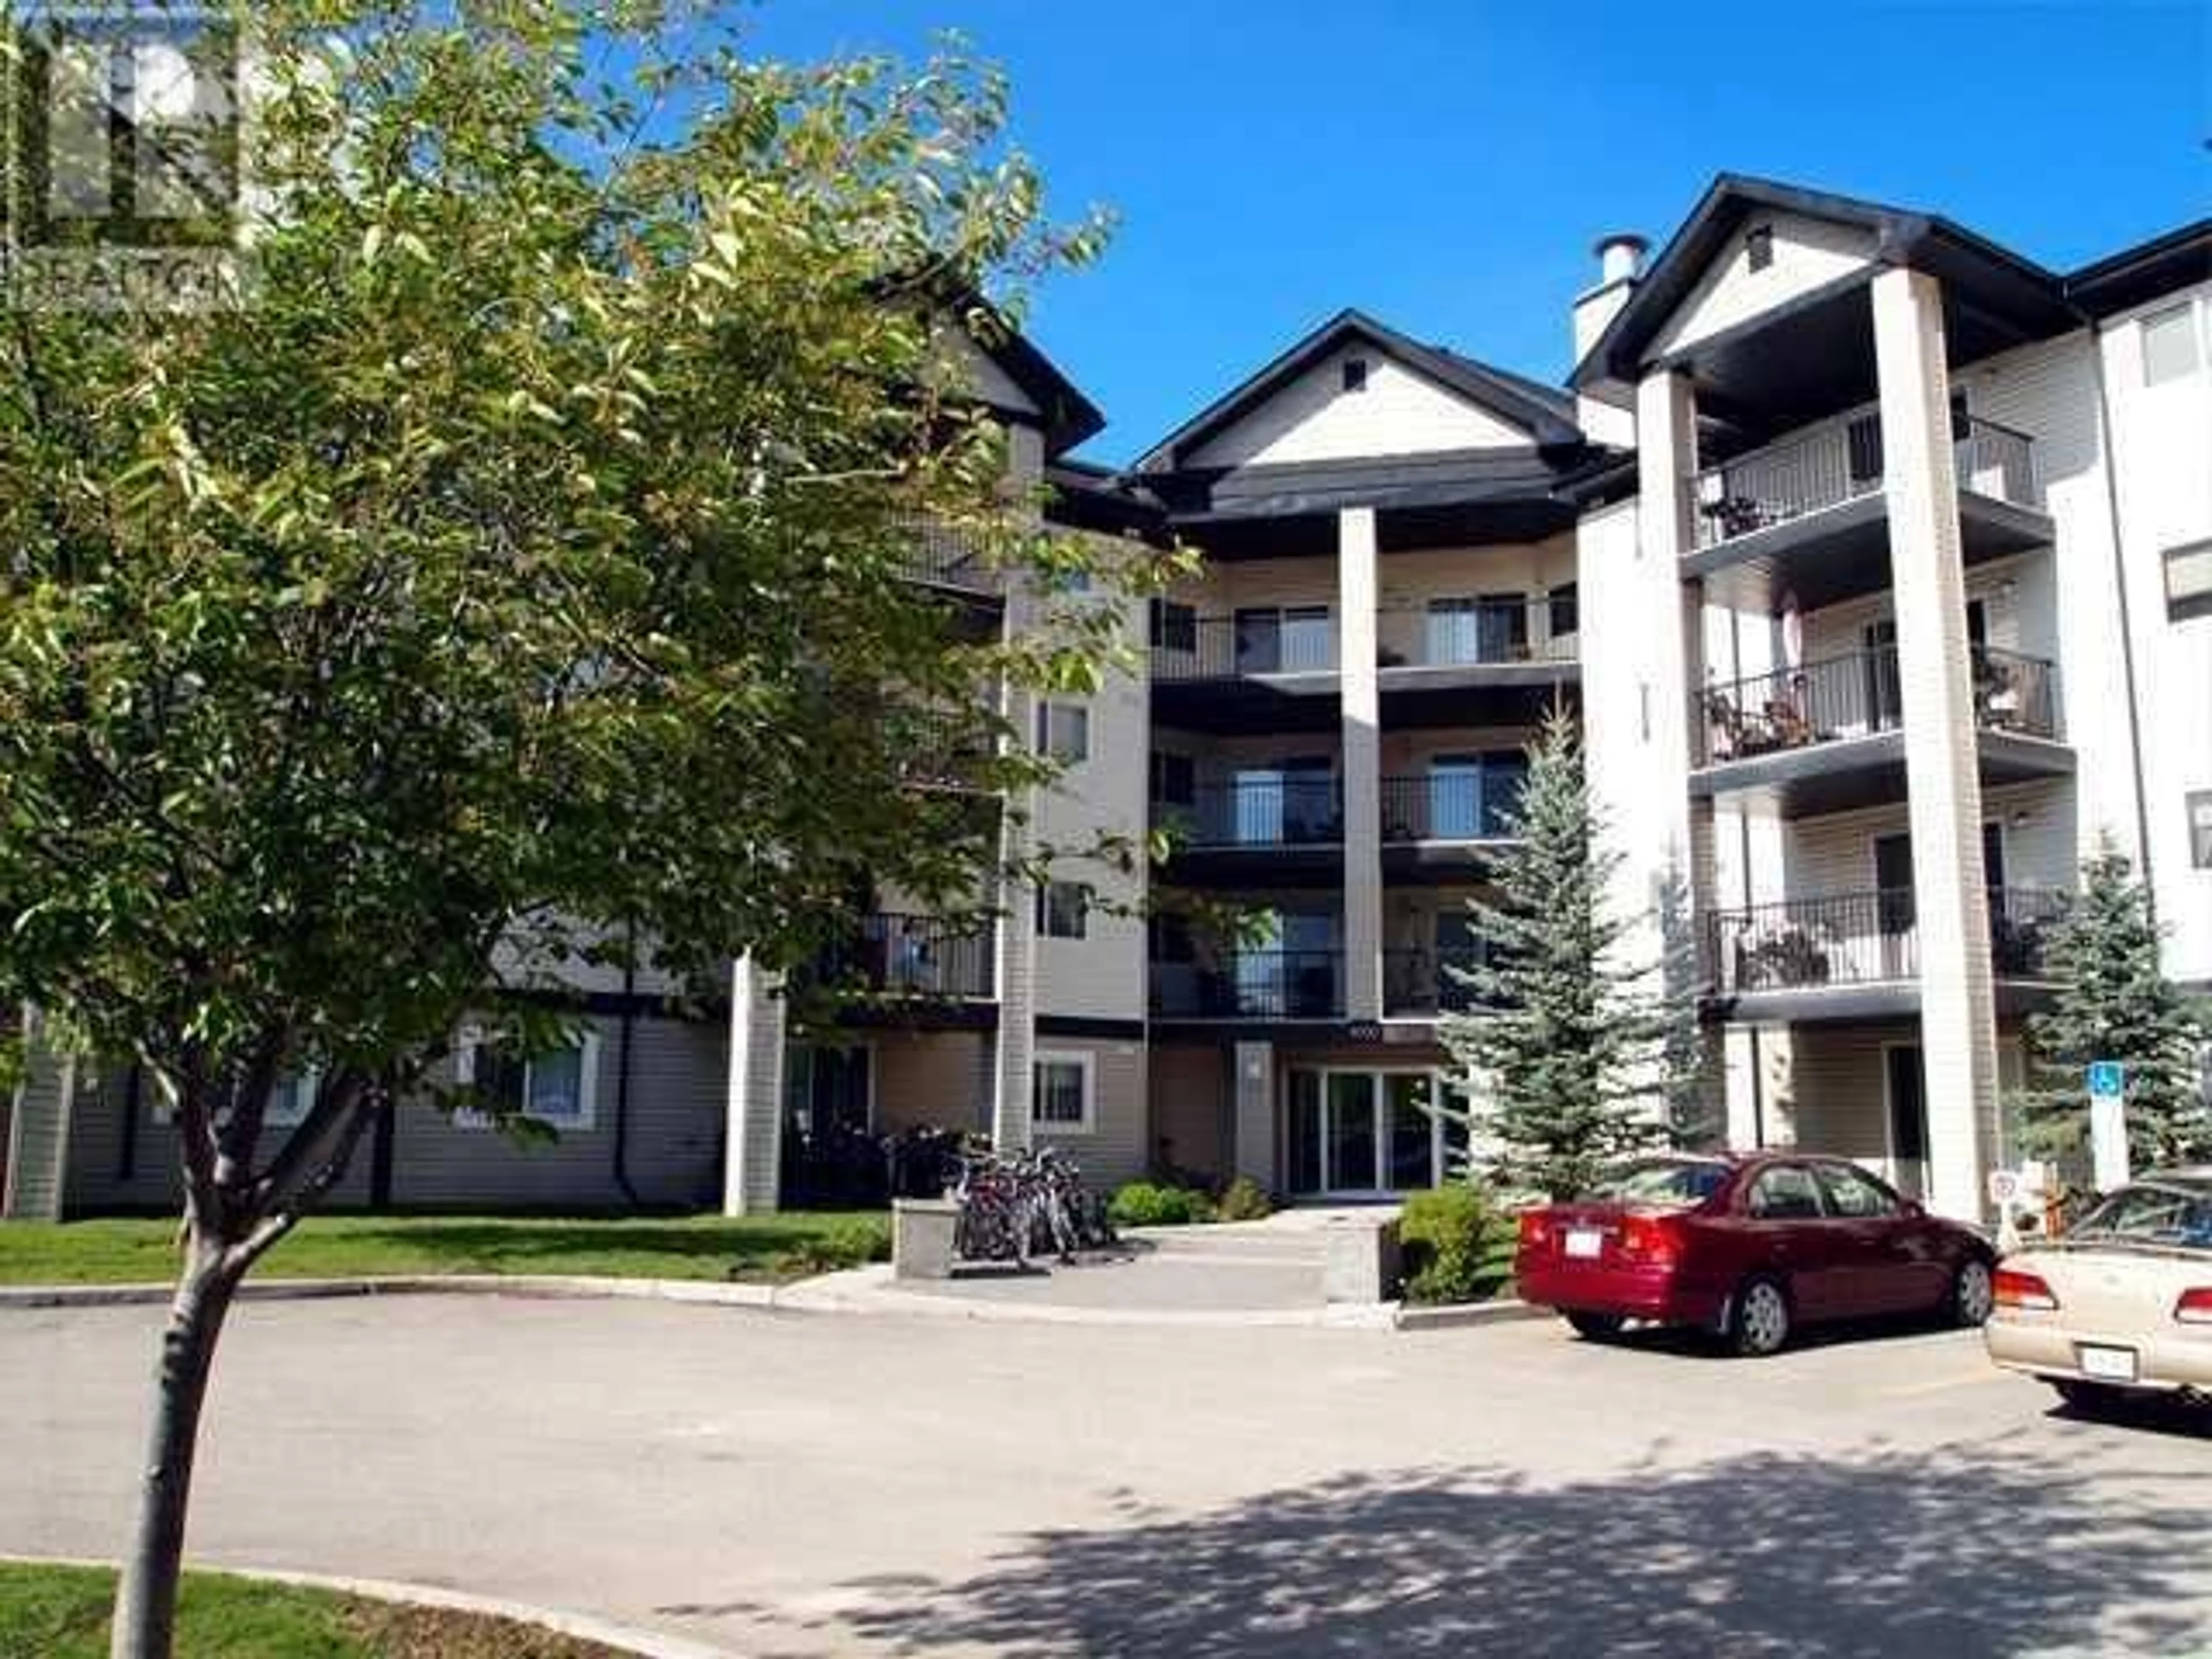 A pic from exterior of the house or condo for 1221 4975 130 Avenue SE, Calgary Alberta T2Z4P2